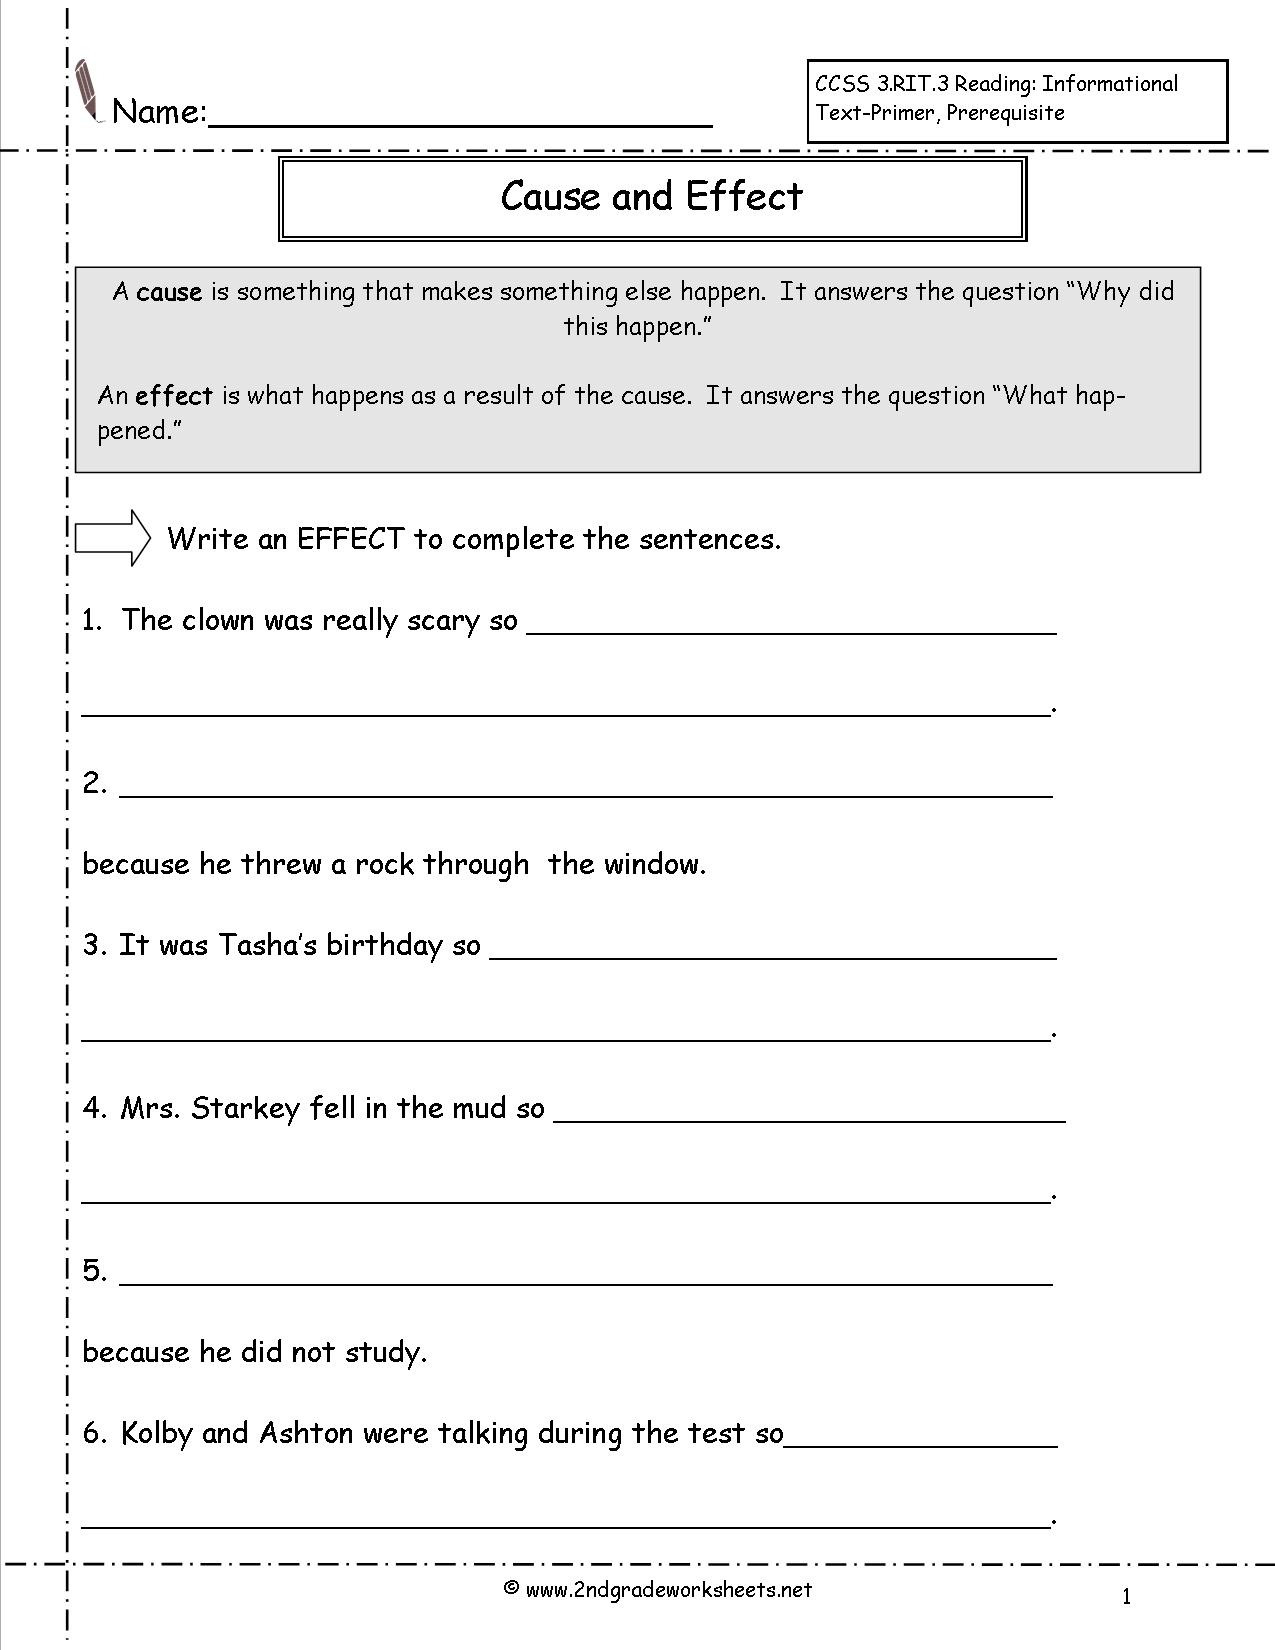 15-best-images-of-cause-and-effect-worksheets-for-kindergarten-cause